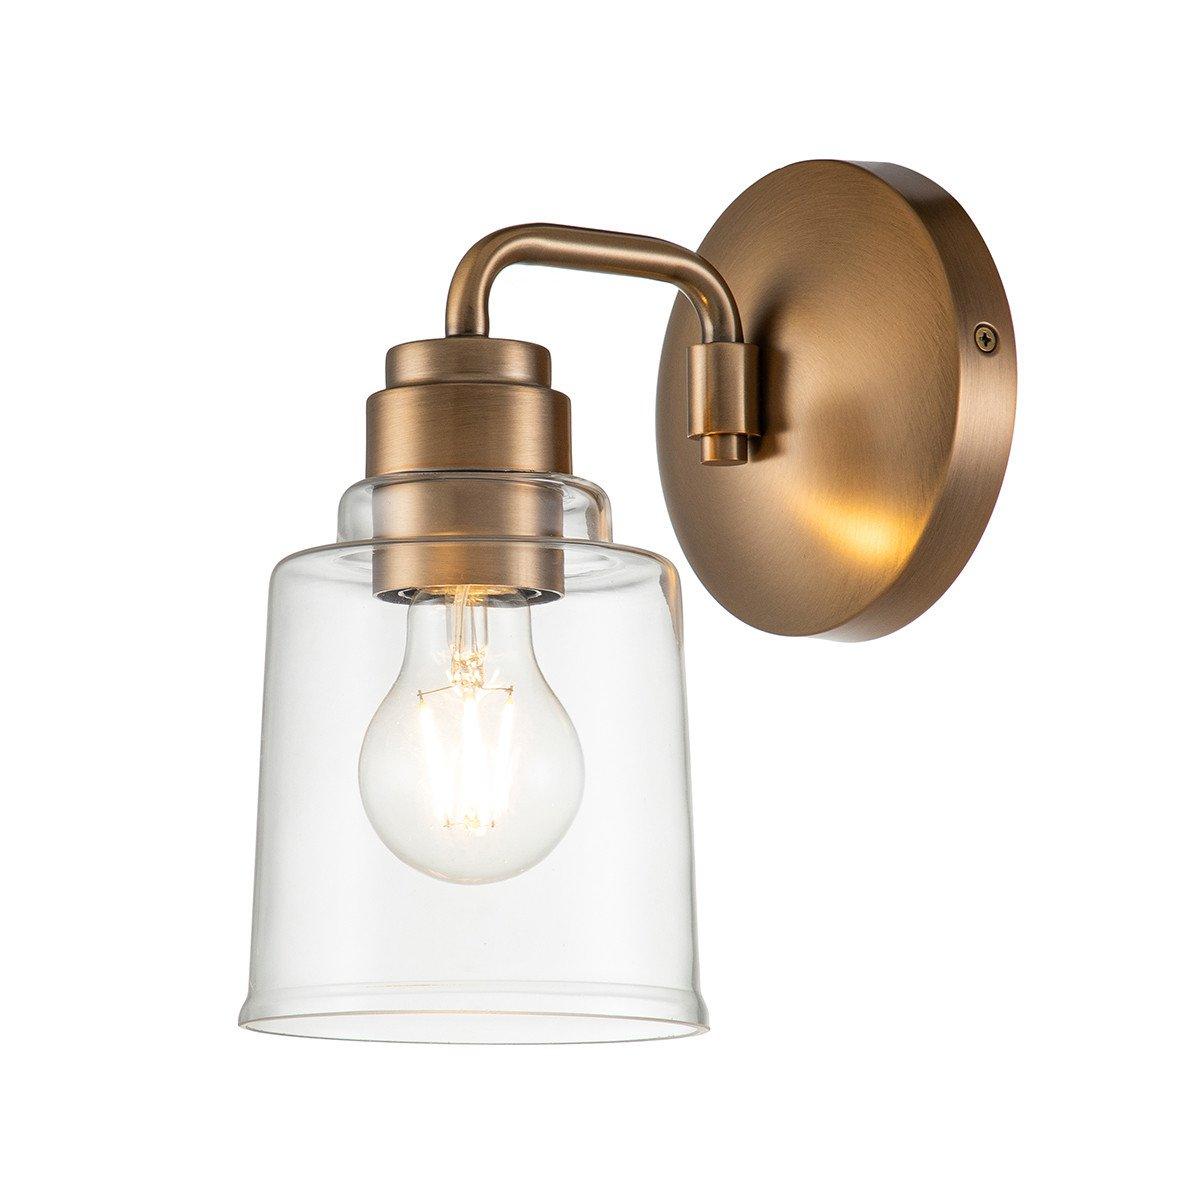 Kichler Aivian Dome Wall Lamp Weathered Brass